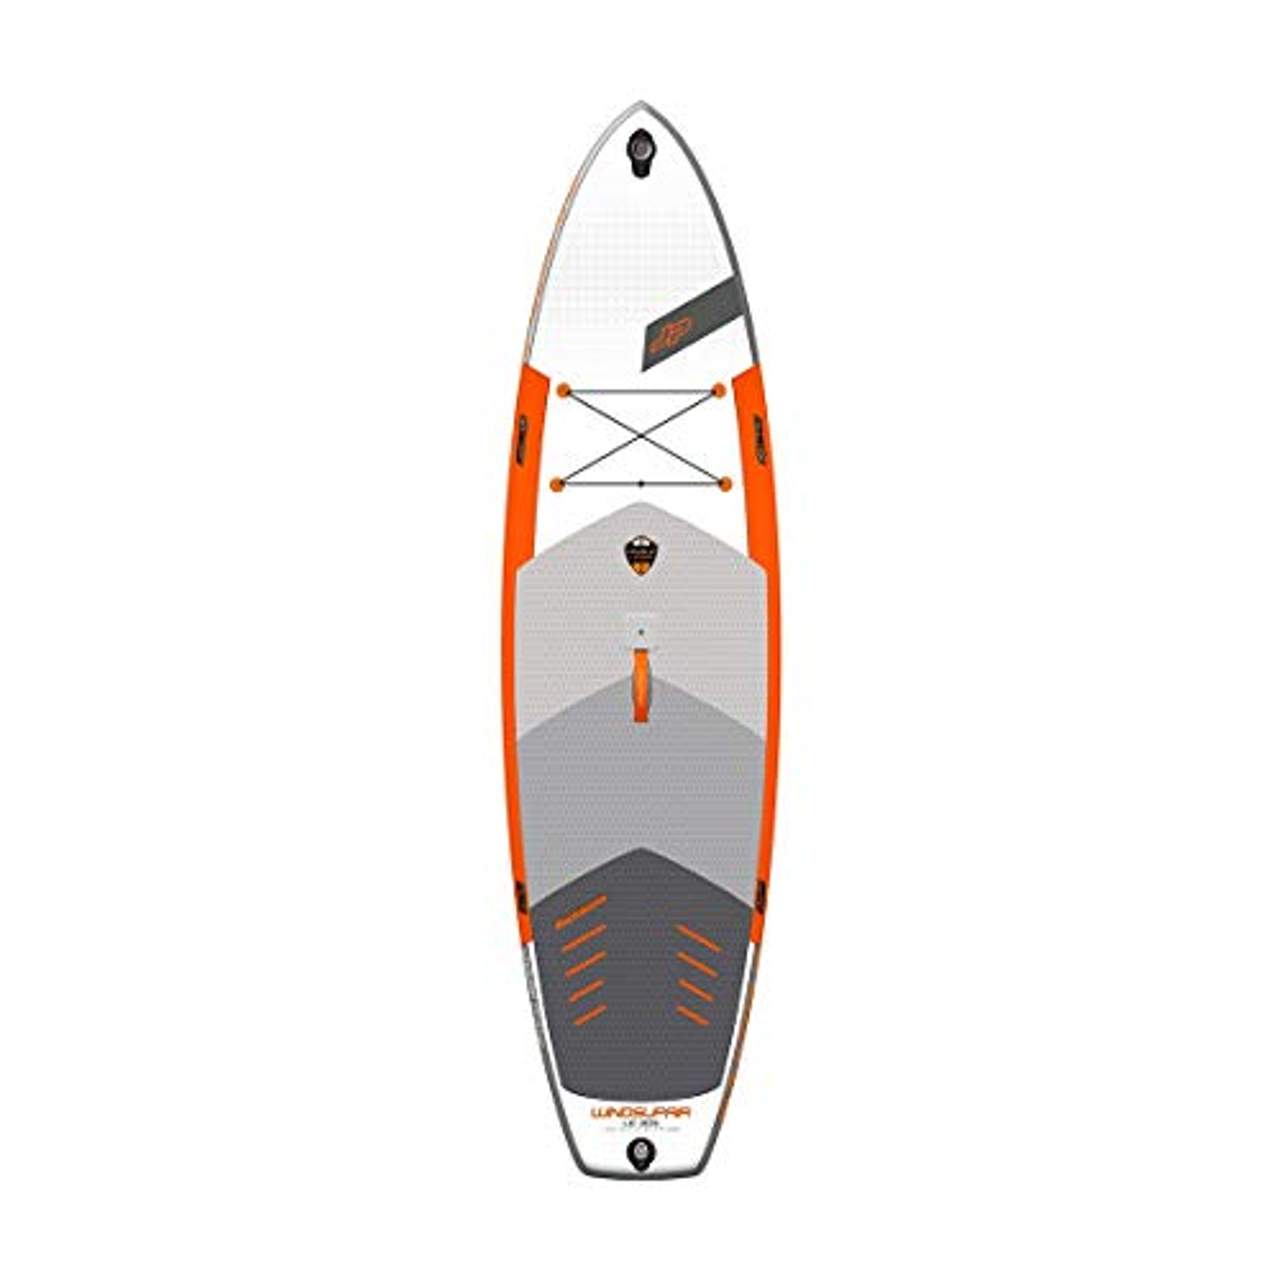 JP WindSup Air LE 3DS Inflatable SUP 2021 12'6"